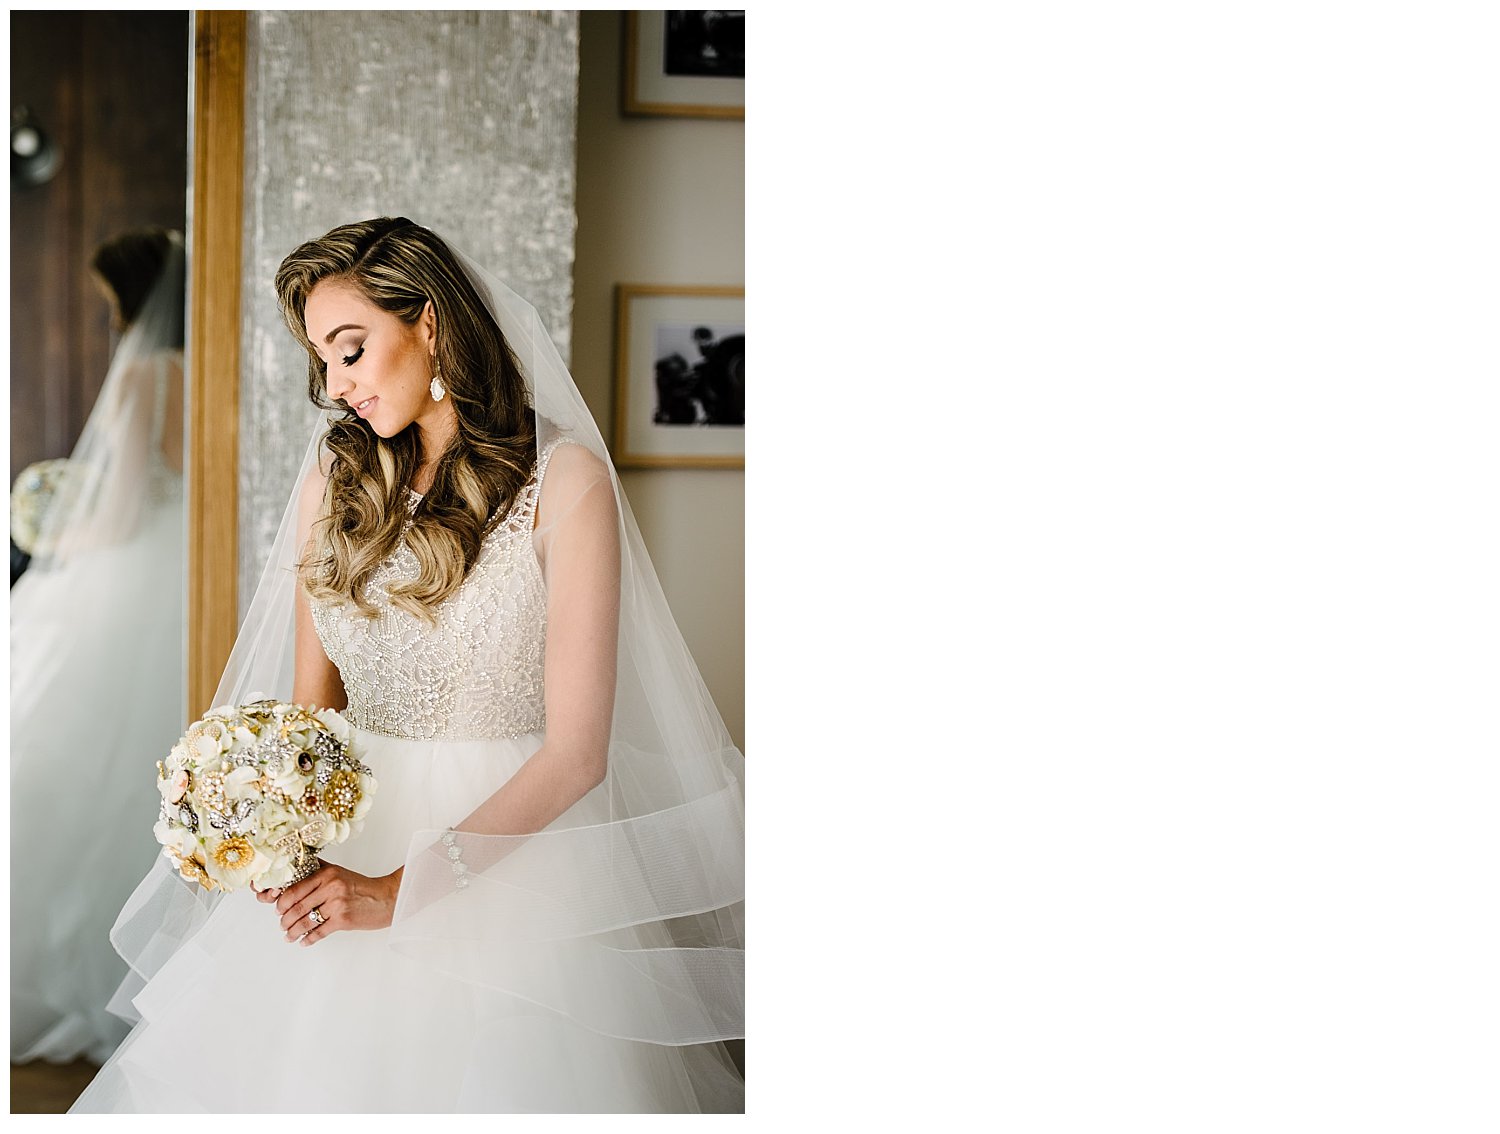 Bride getting ready at Hotel Indigo in el paso texas by stephane lemaire photography